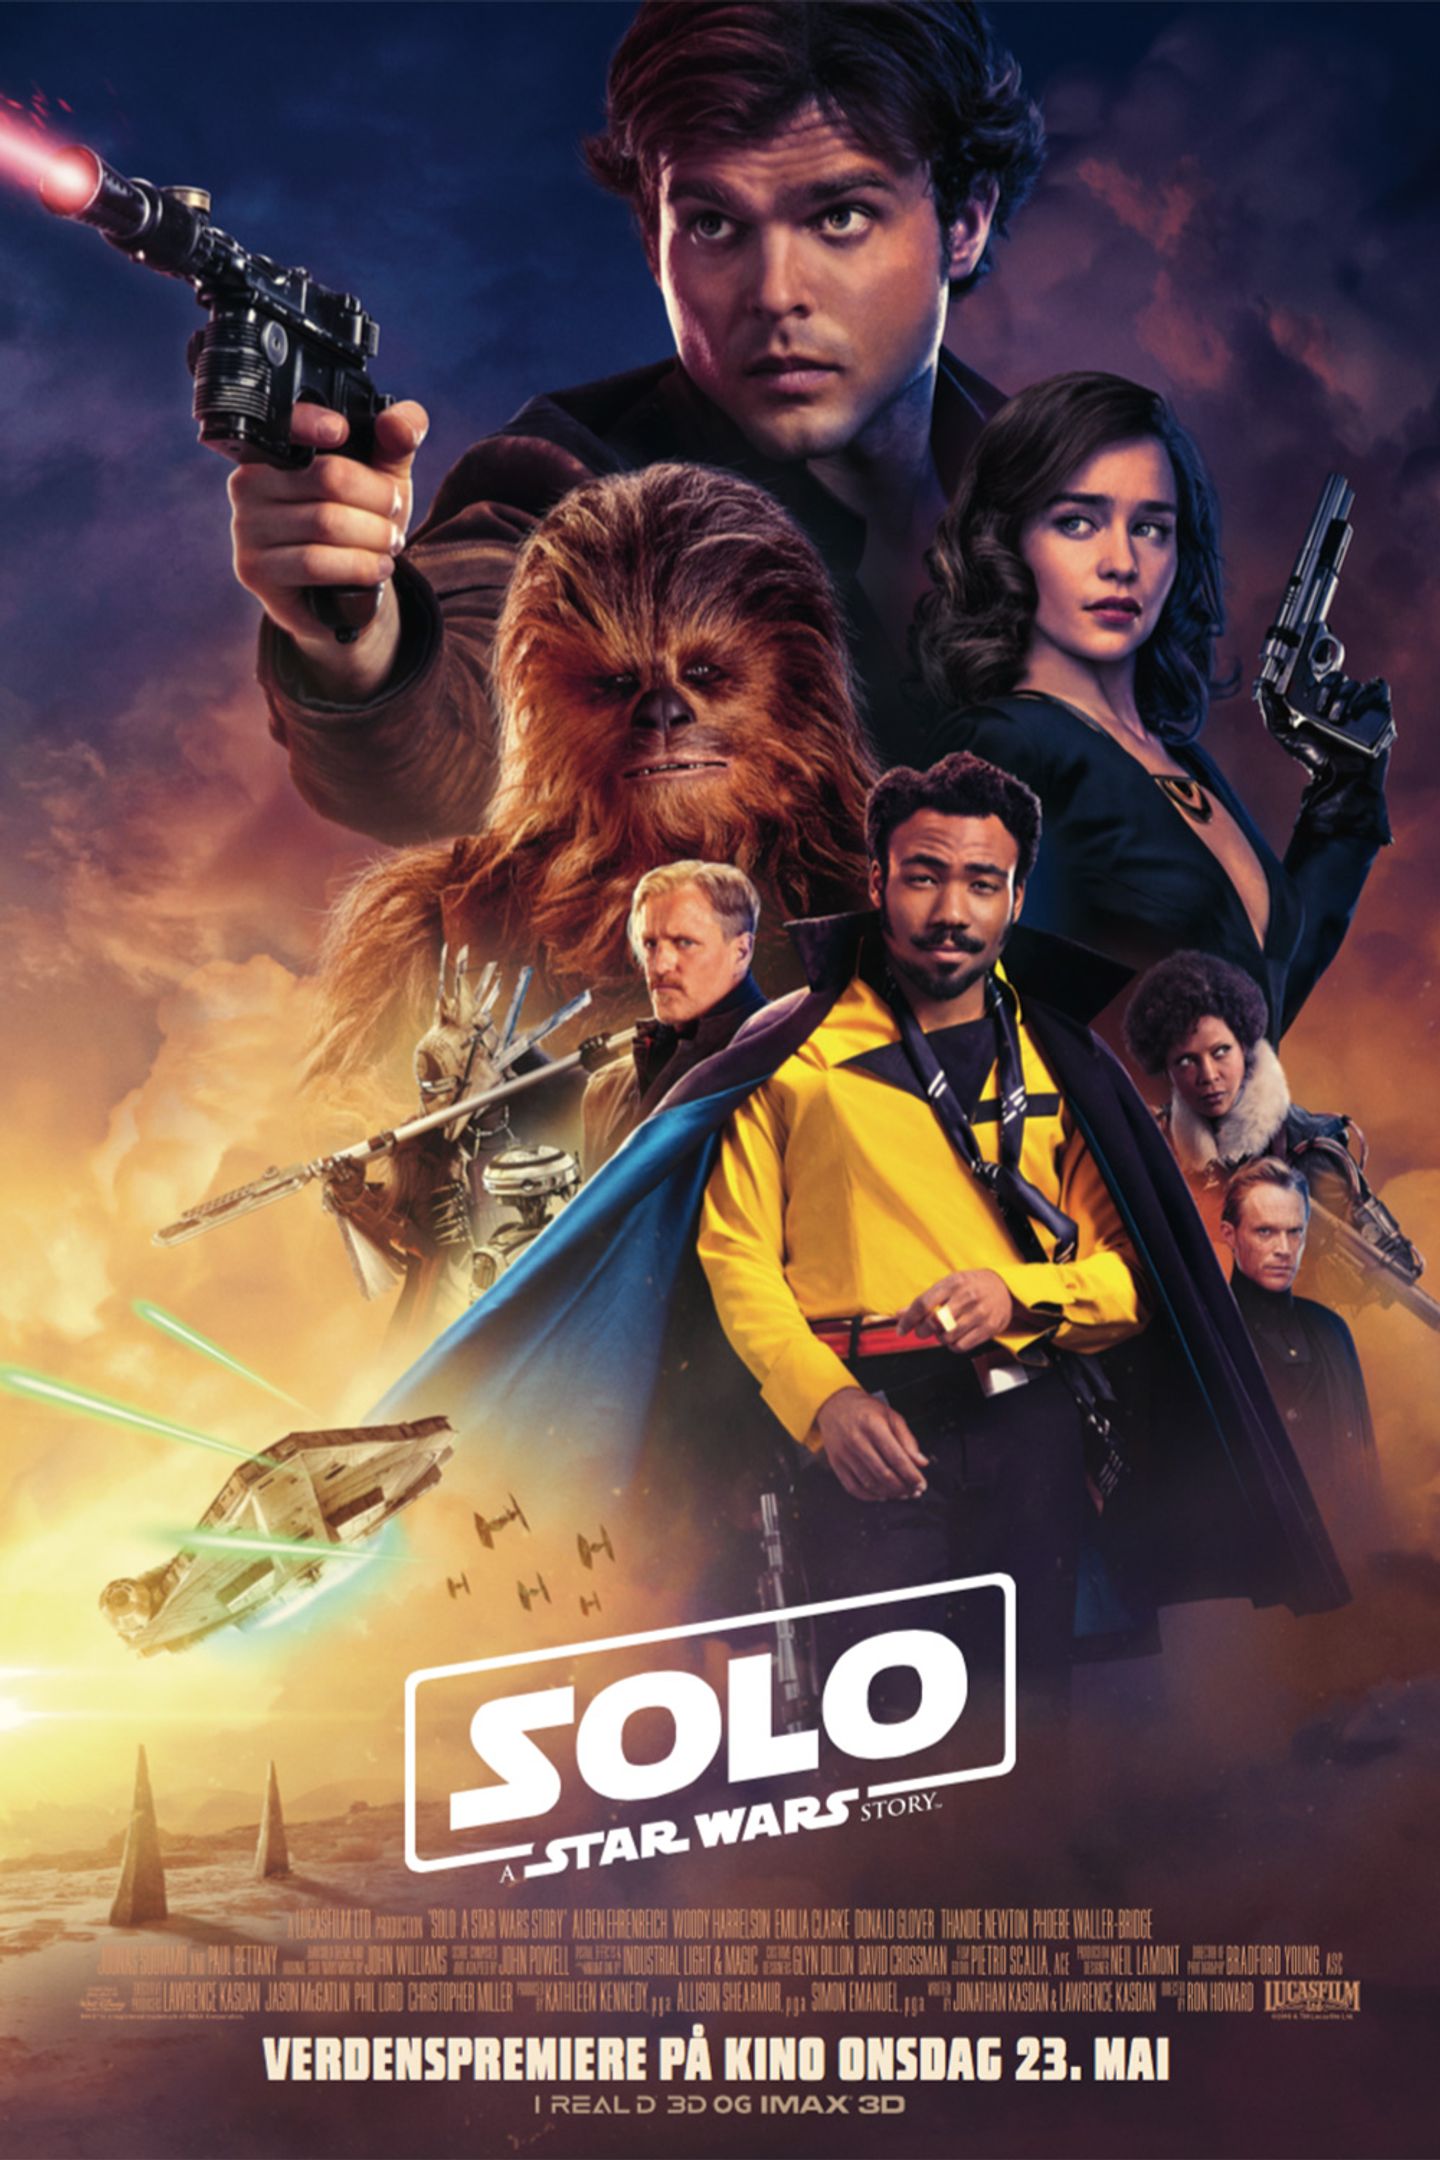 Plakat for 'Solo: A  Star Wars Story 2D'